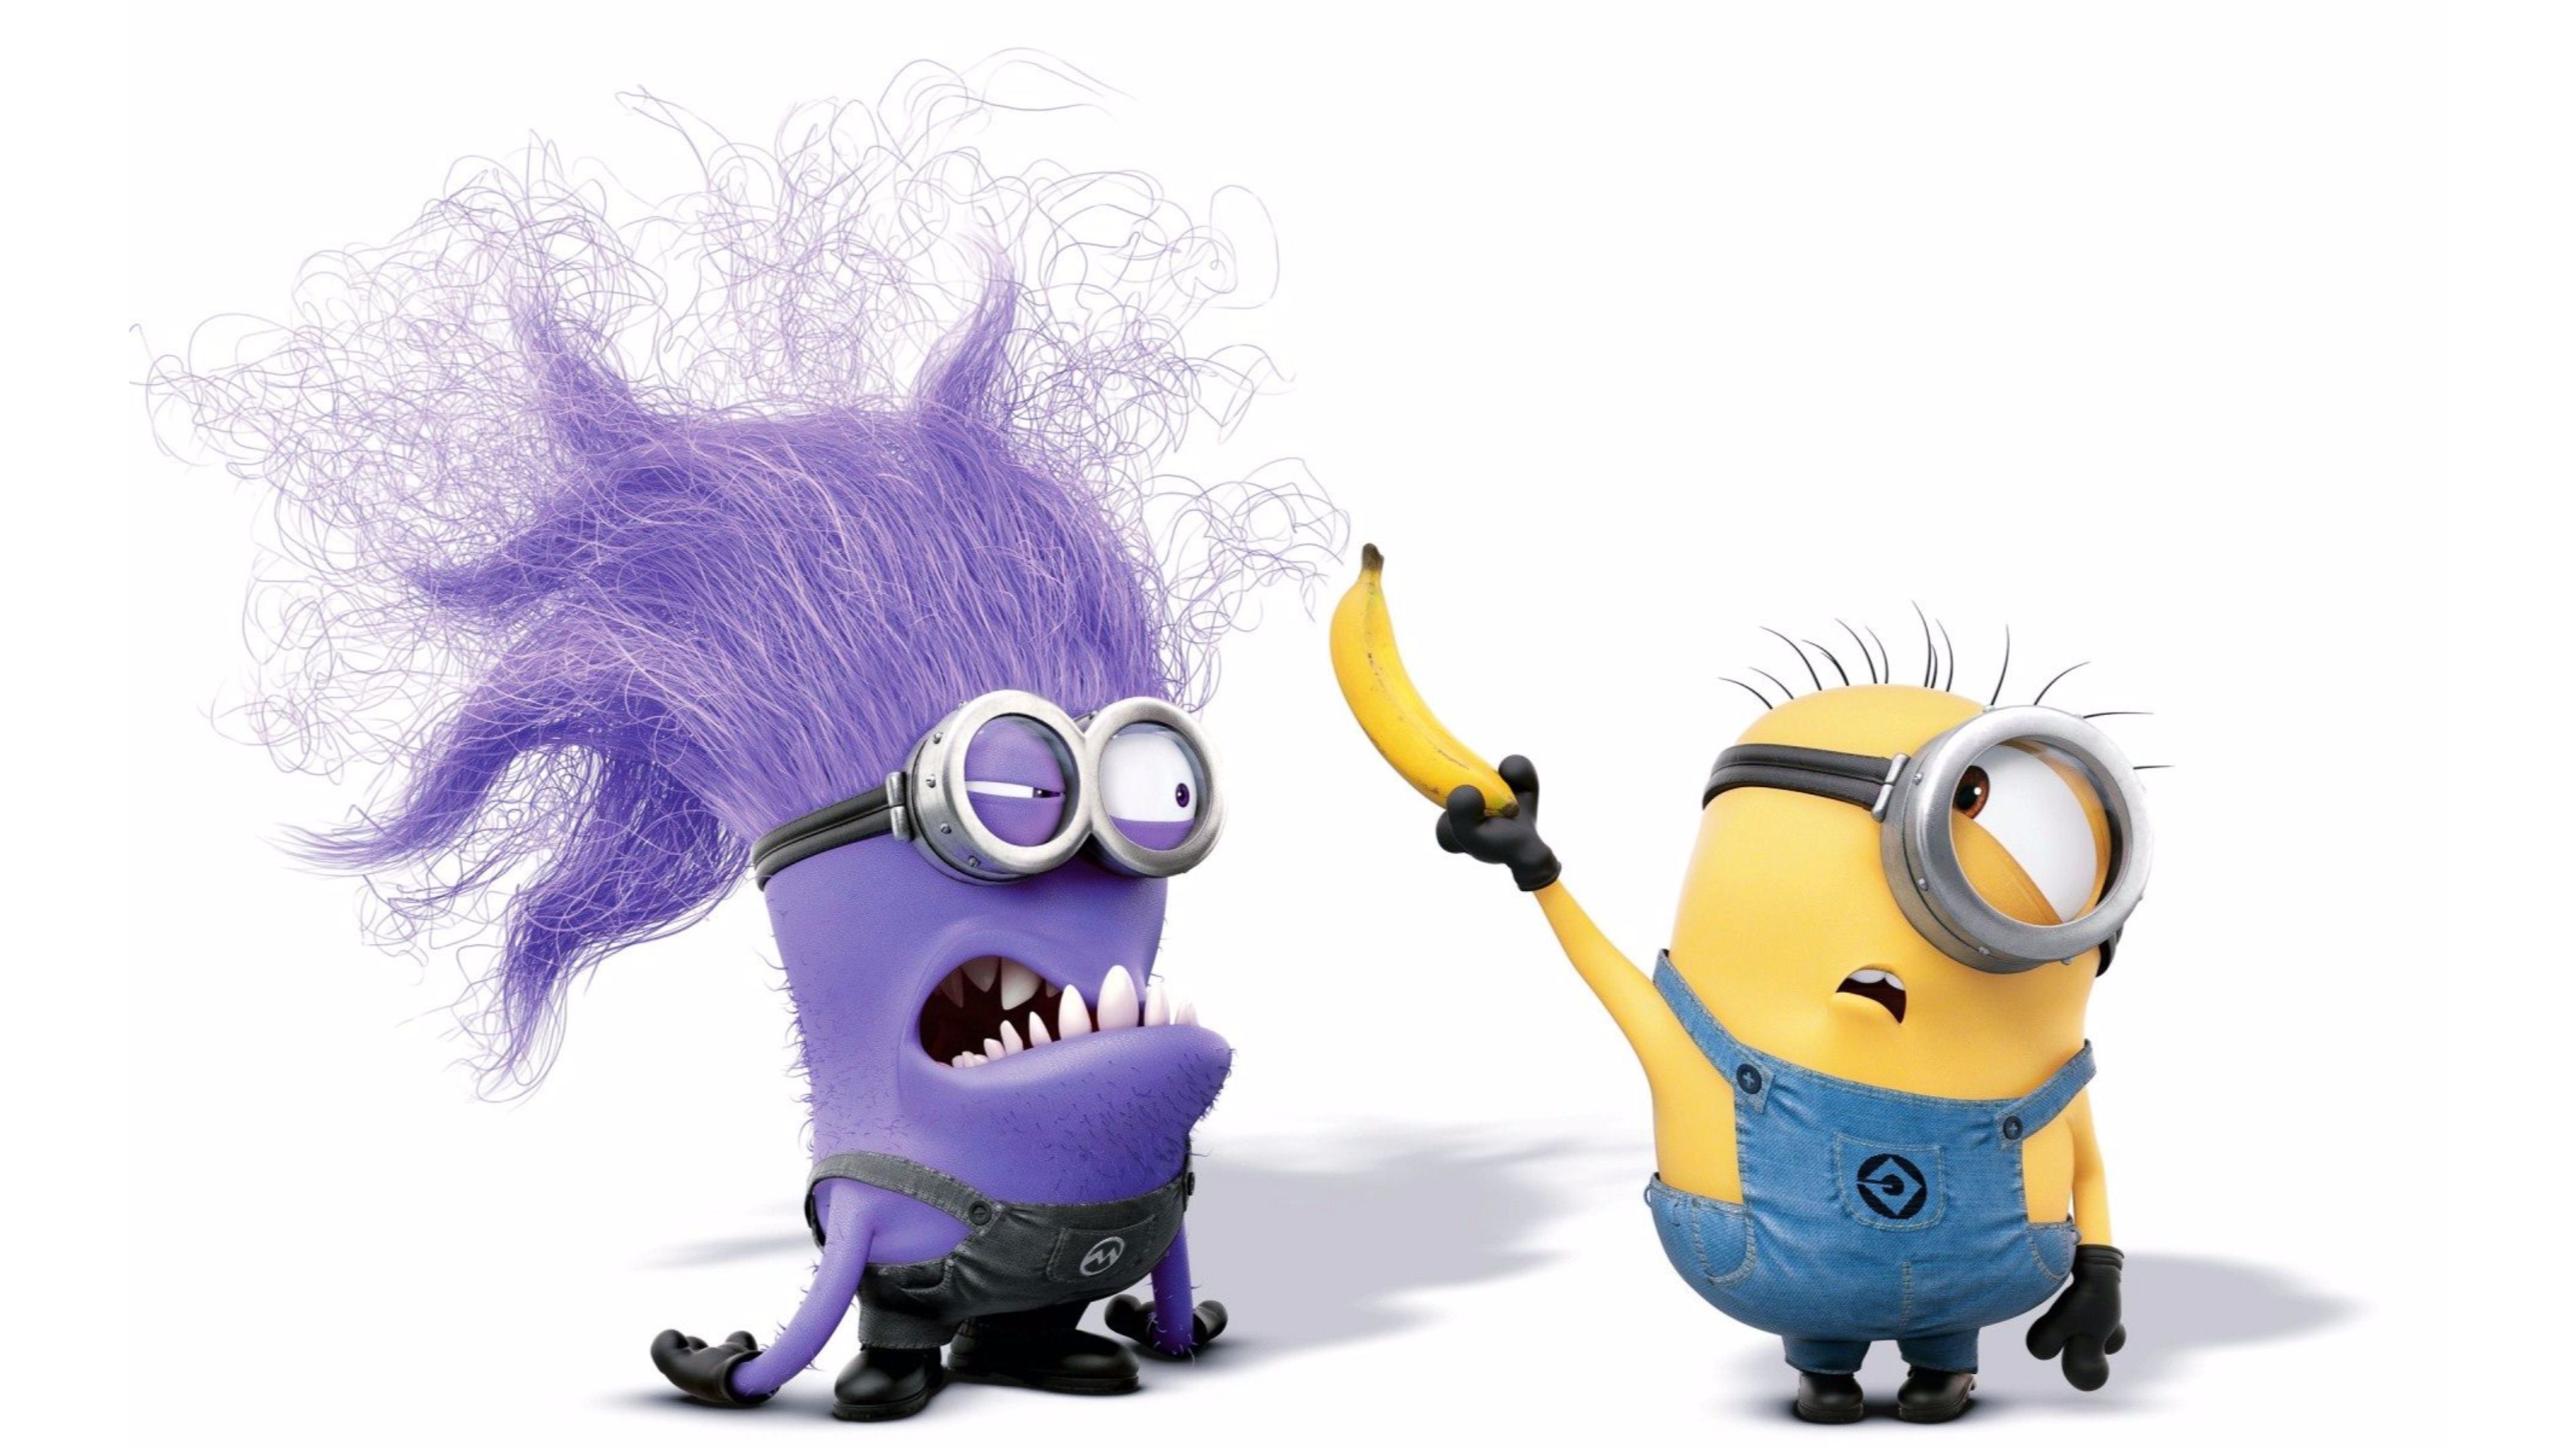 Minions 4K wallpaper for your desktop or mobile screen free and easy to download